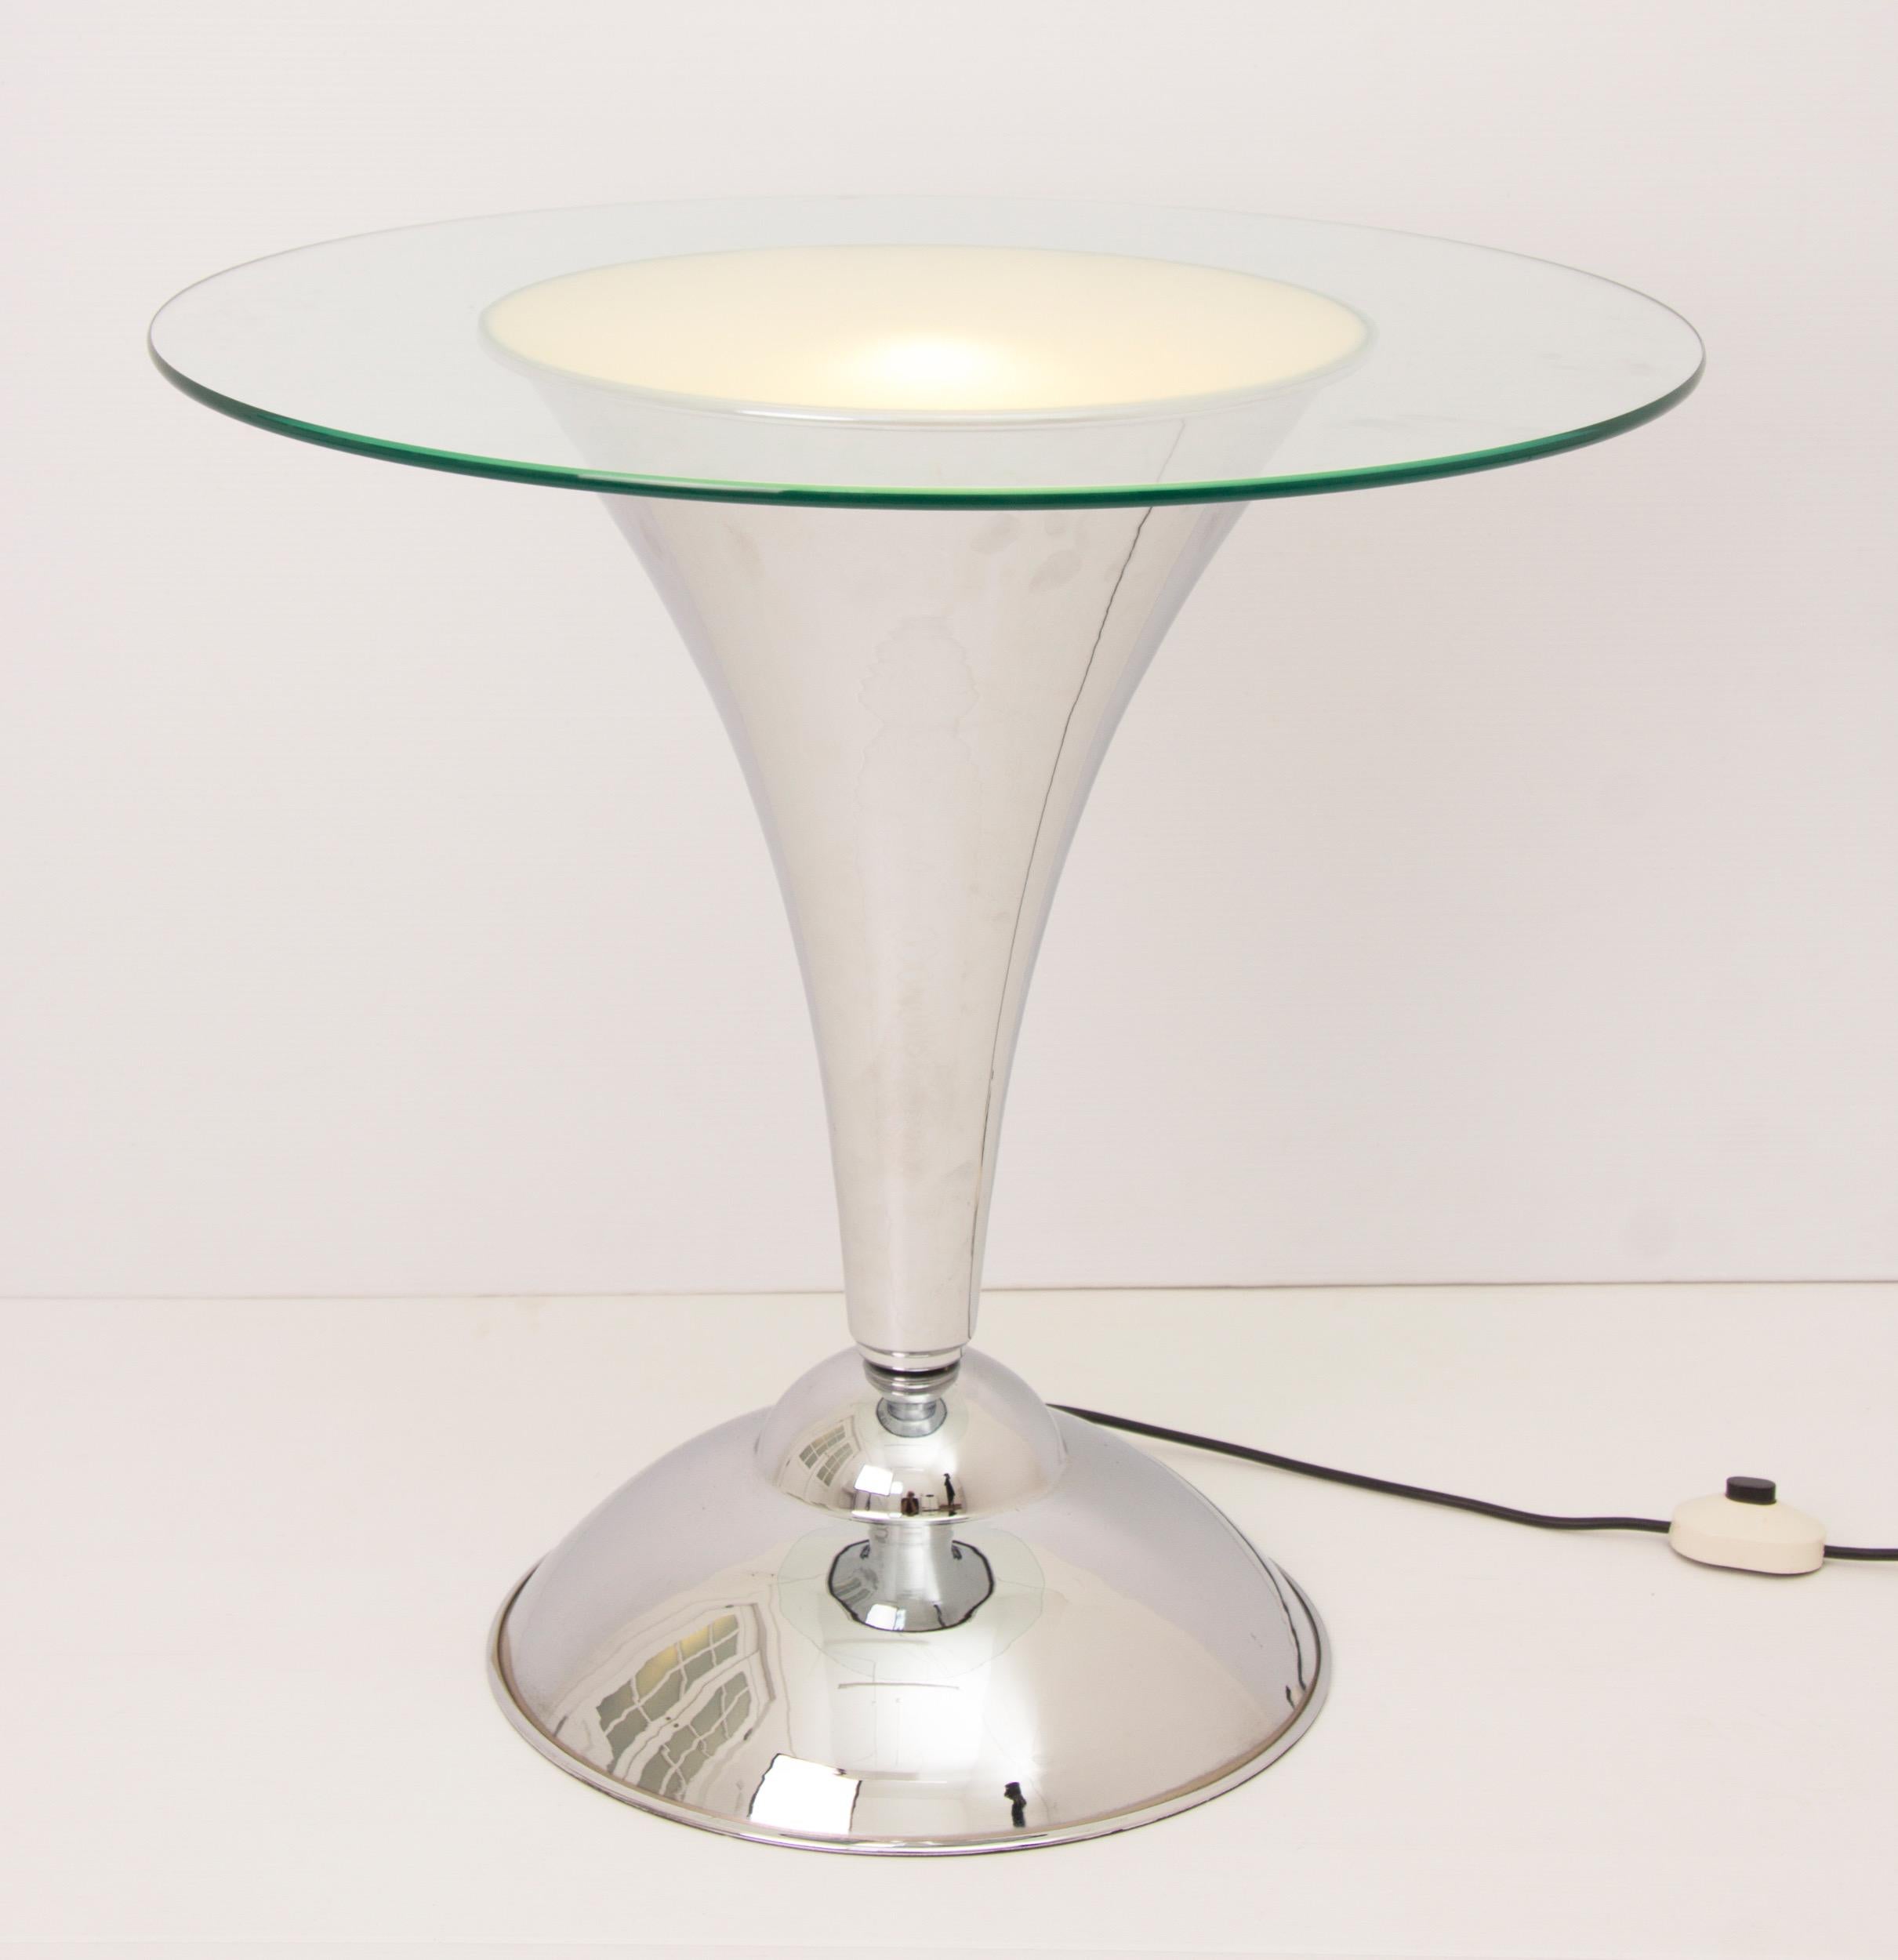 Art Deco illuminating table from the Metz & Co. department store in Amsterdam.
Trumpet form chrome base with clear glass top with frosted film centre.
These tables would have been used in the window displays.
Measures: H 58 cm, W 61 cm, D 61 cm.